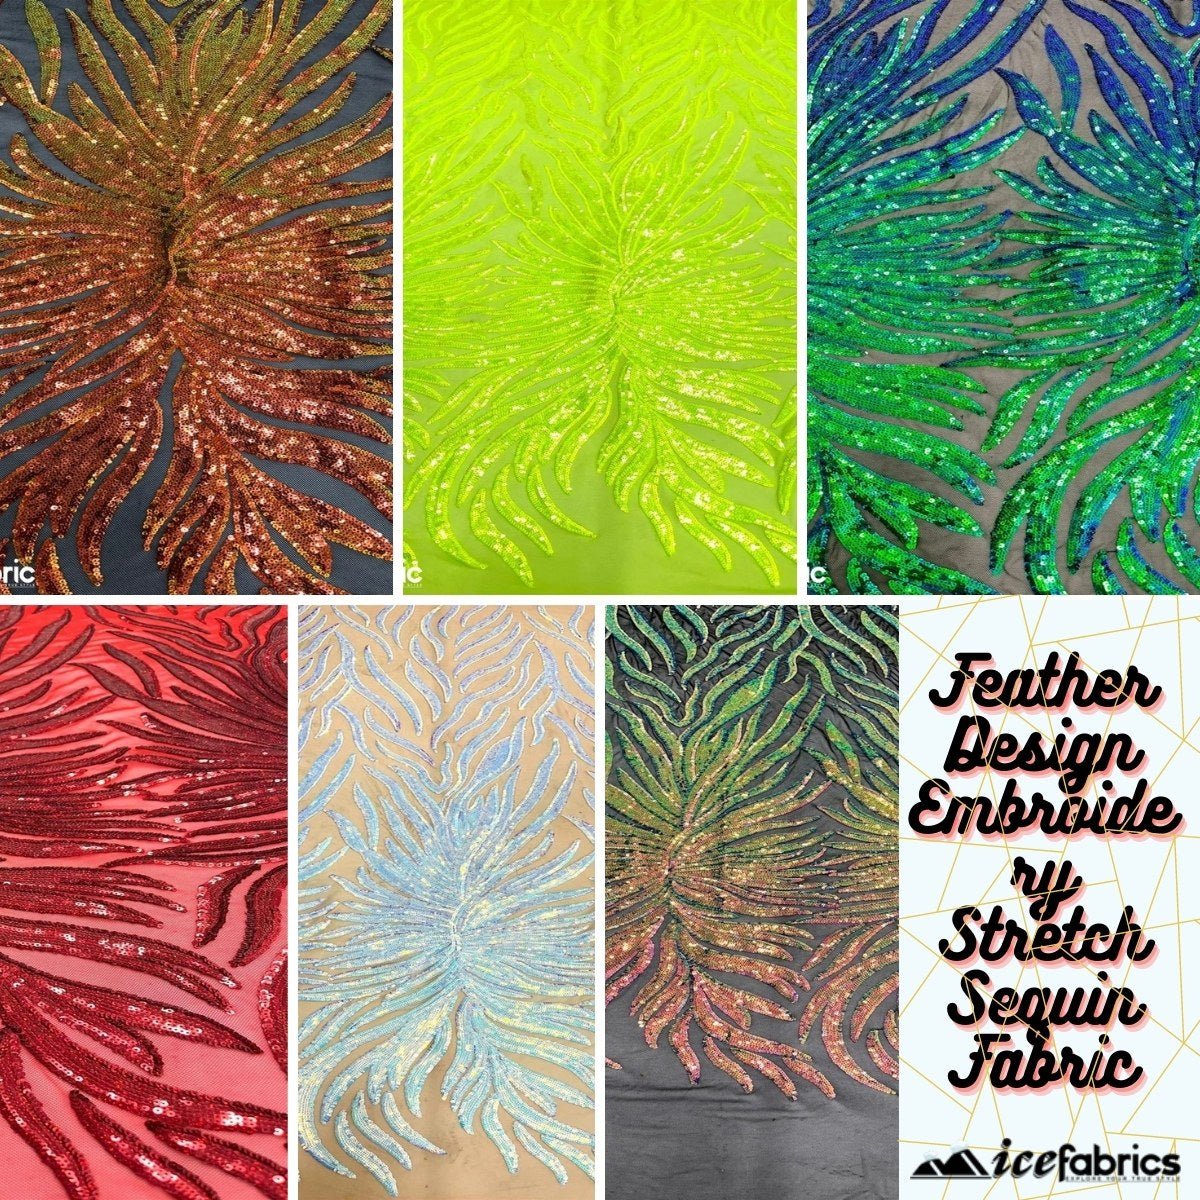 Feather Design Embroidery Stretch Sequin Fabric | 4 Way StretchICE FABRICSICE FABRICSPink Green OrangeFeather Design Embroidery Stretch Sequin Fabric | 4 Way Stretch ICE FABRICS